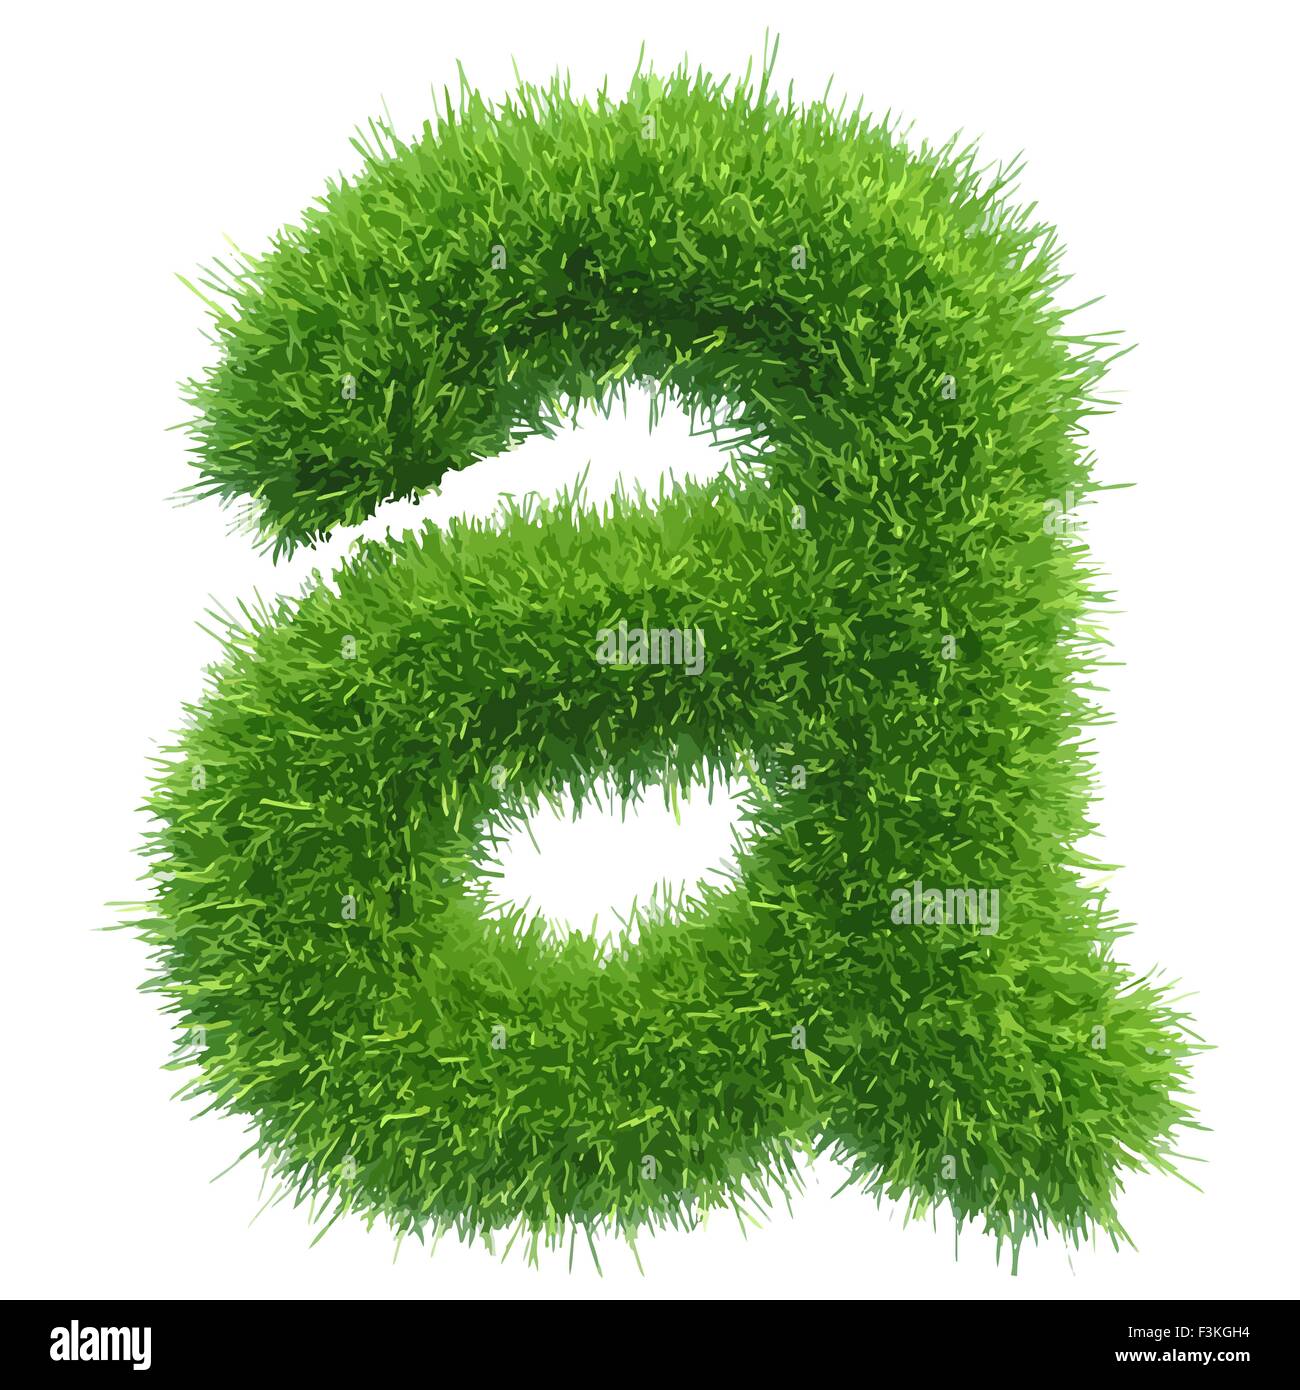 Vector small grass letter a on white background Stock Vector